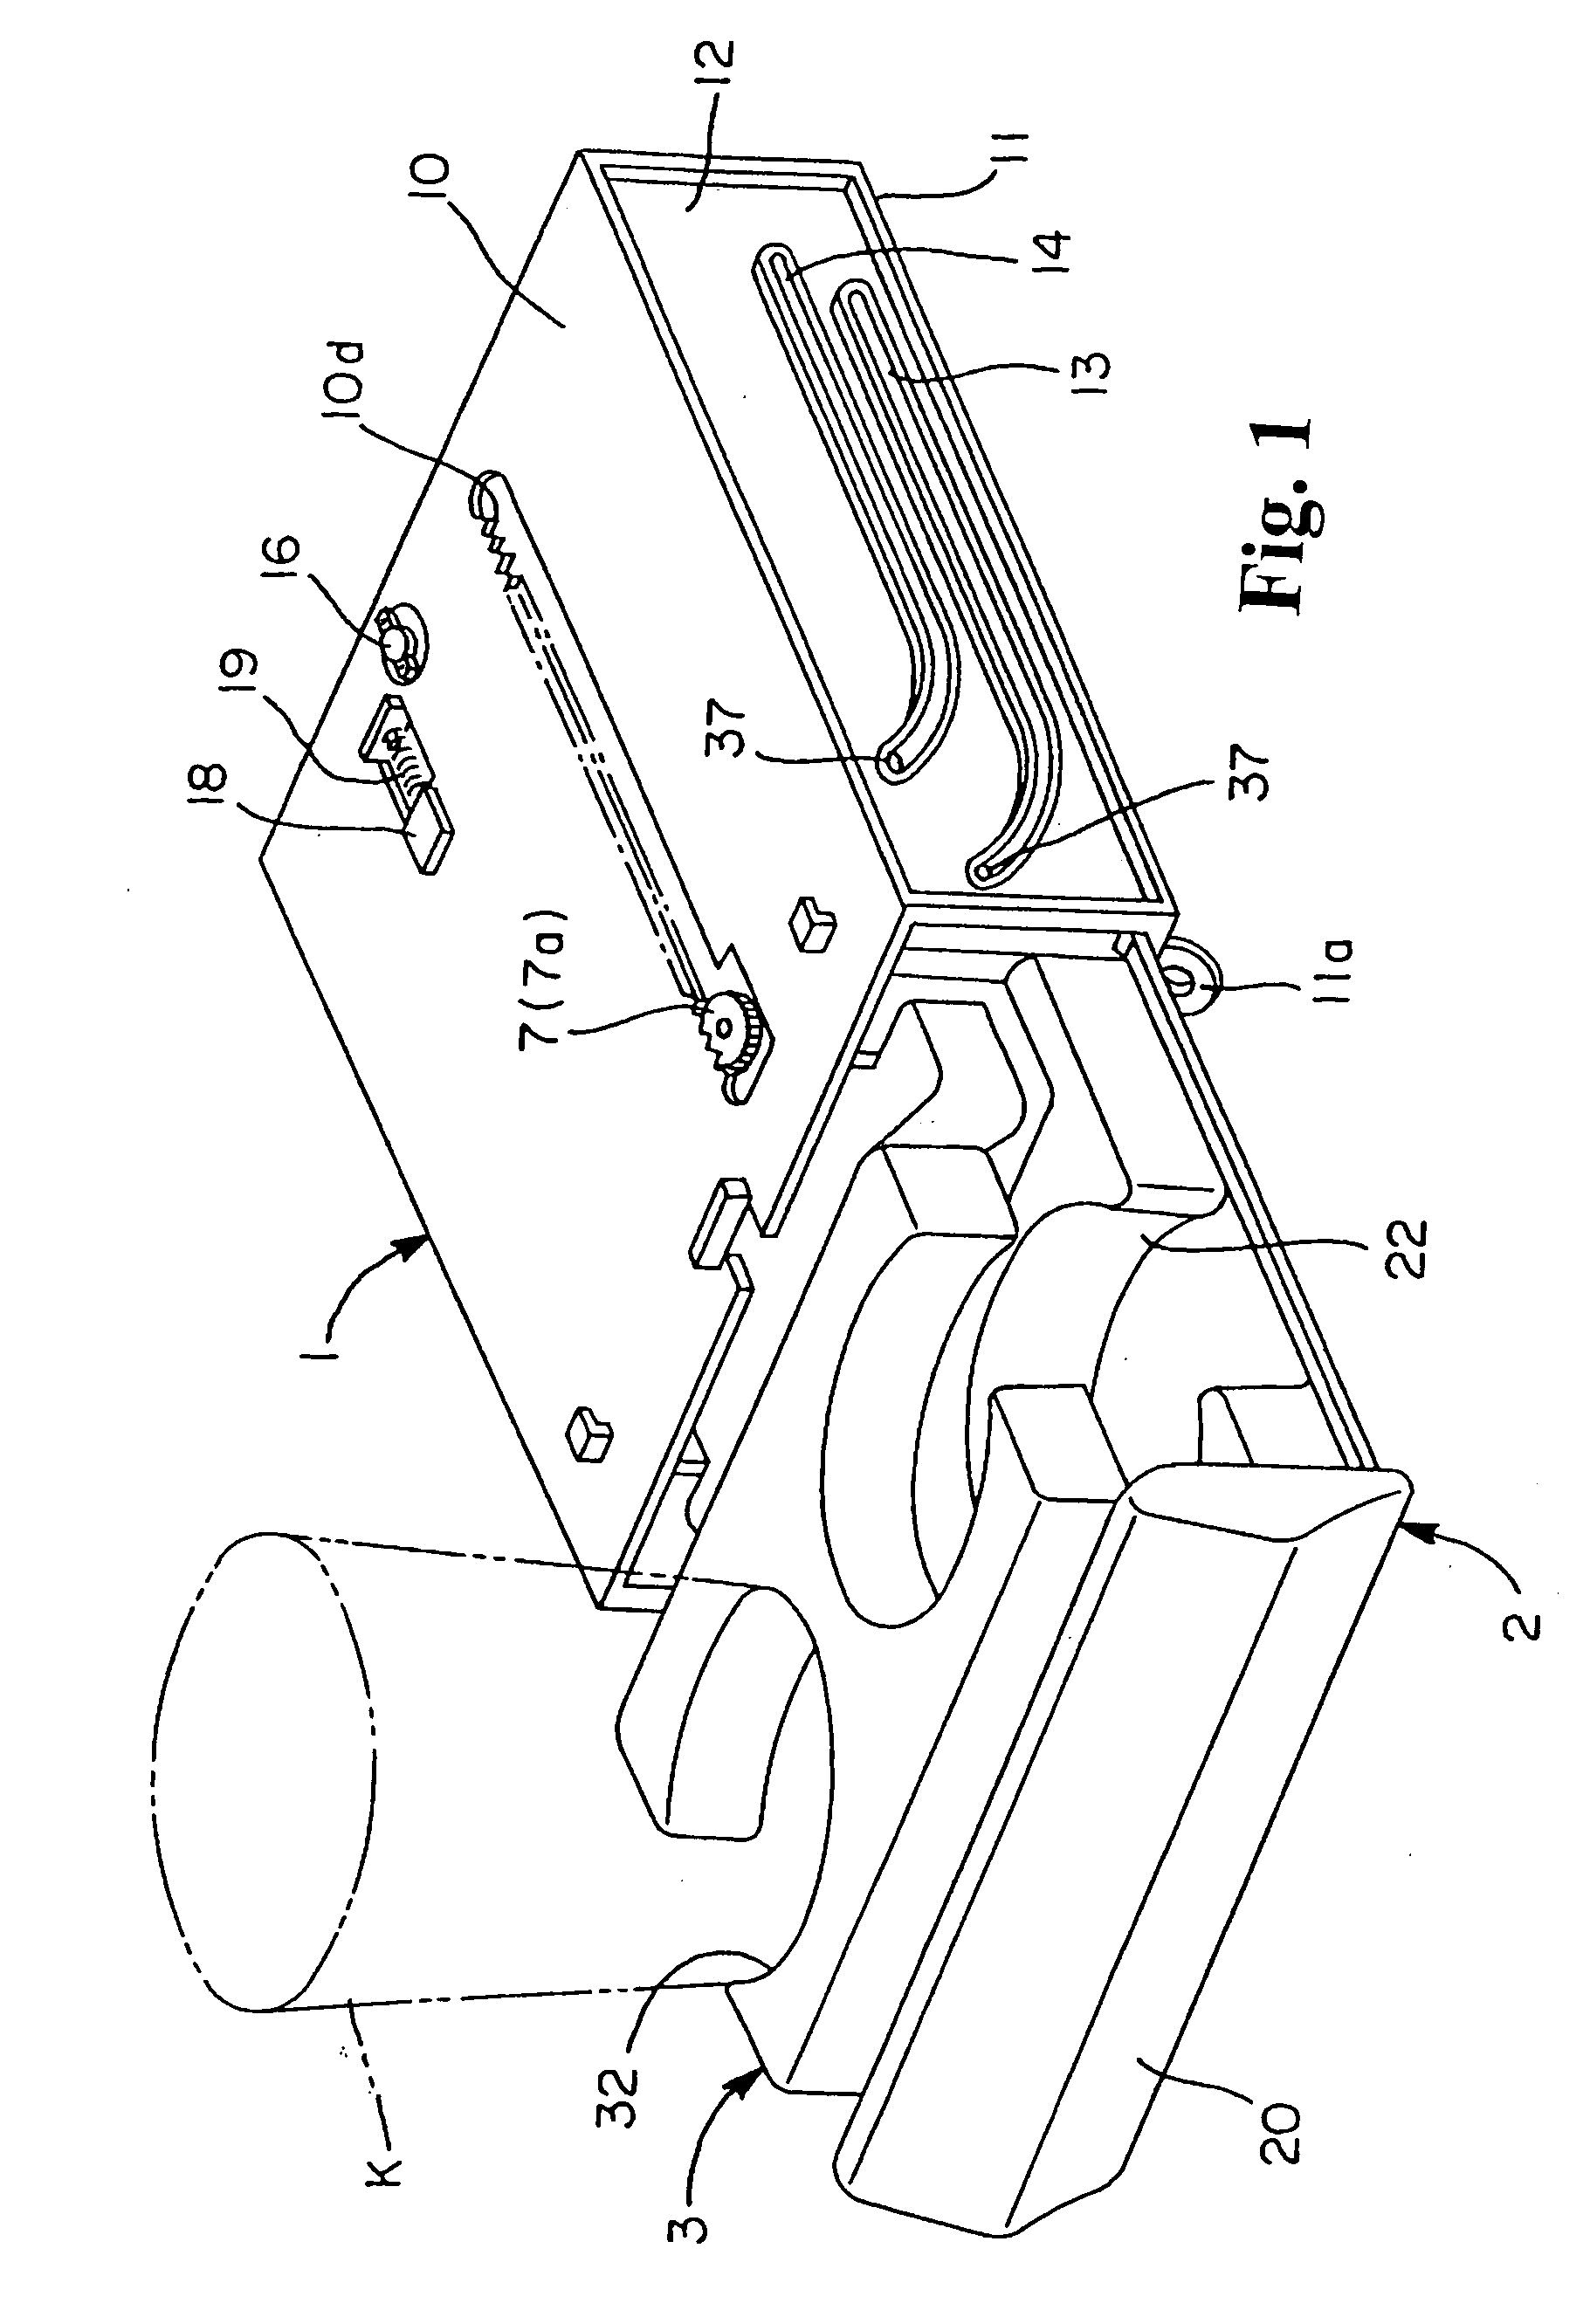 Cup holding device